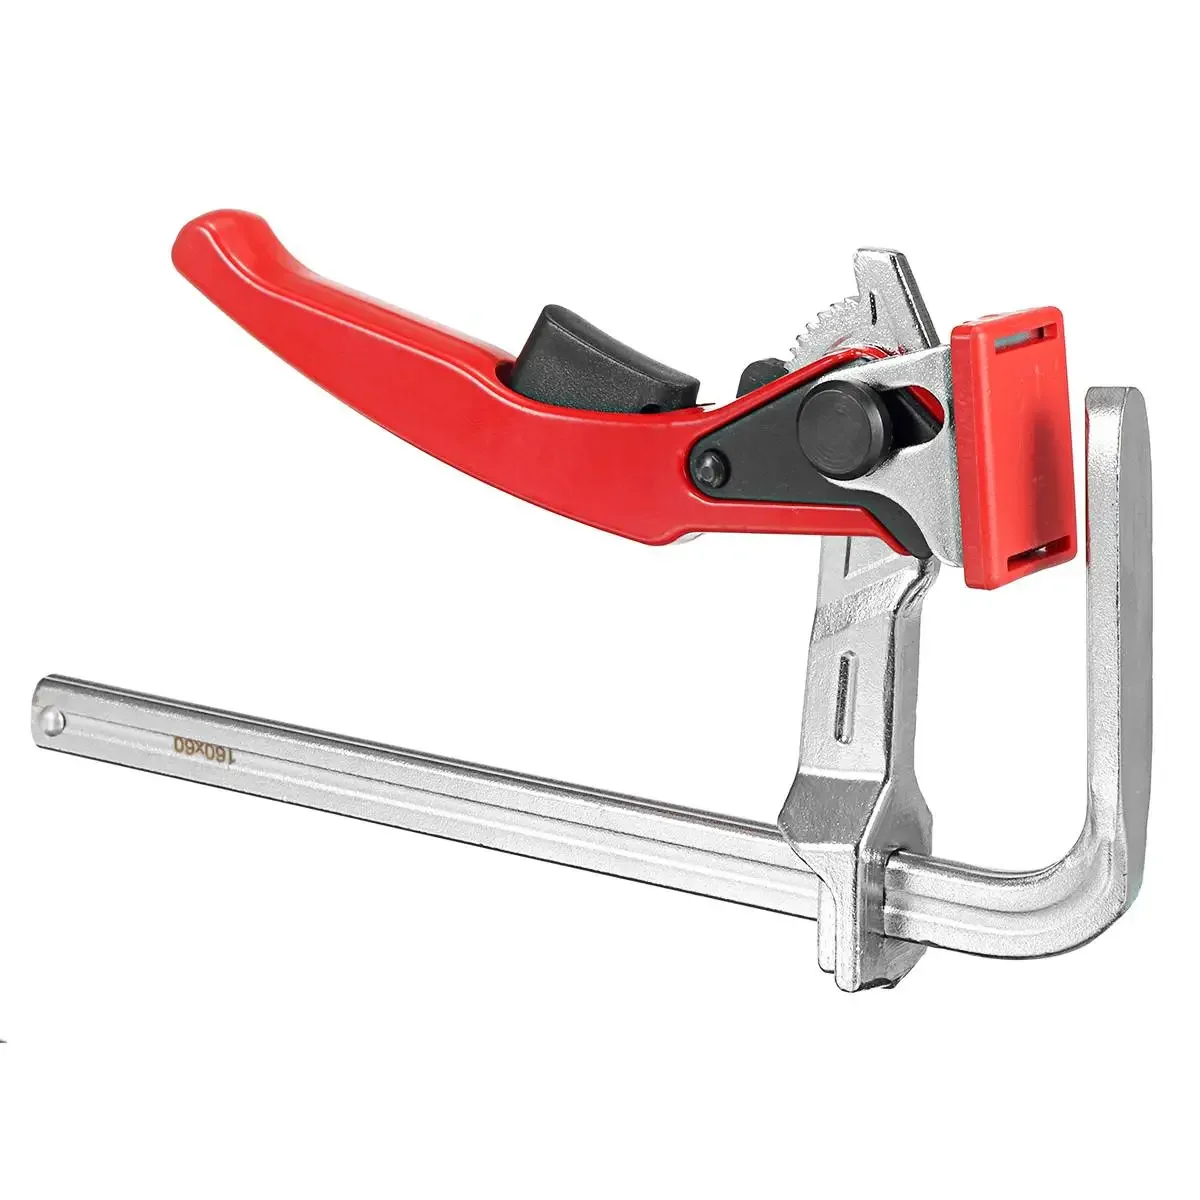 

MFT Clamp Quick Guide Rail Clamp F Clamp Heavy Duty Quick Release For MFT Guide Rail System Hand Woodworking Tool DIY